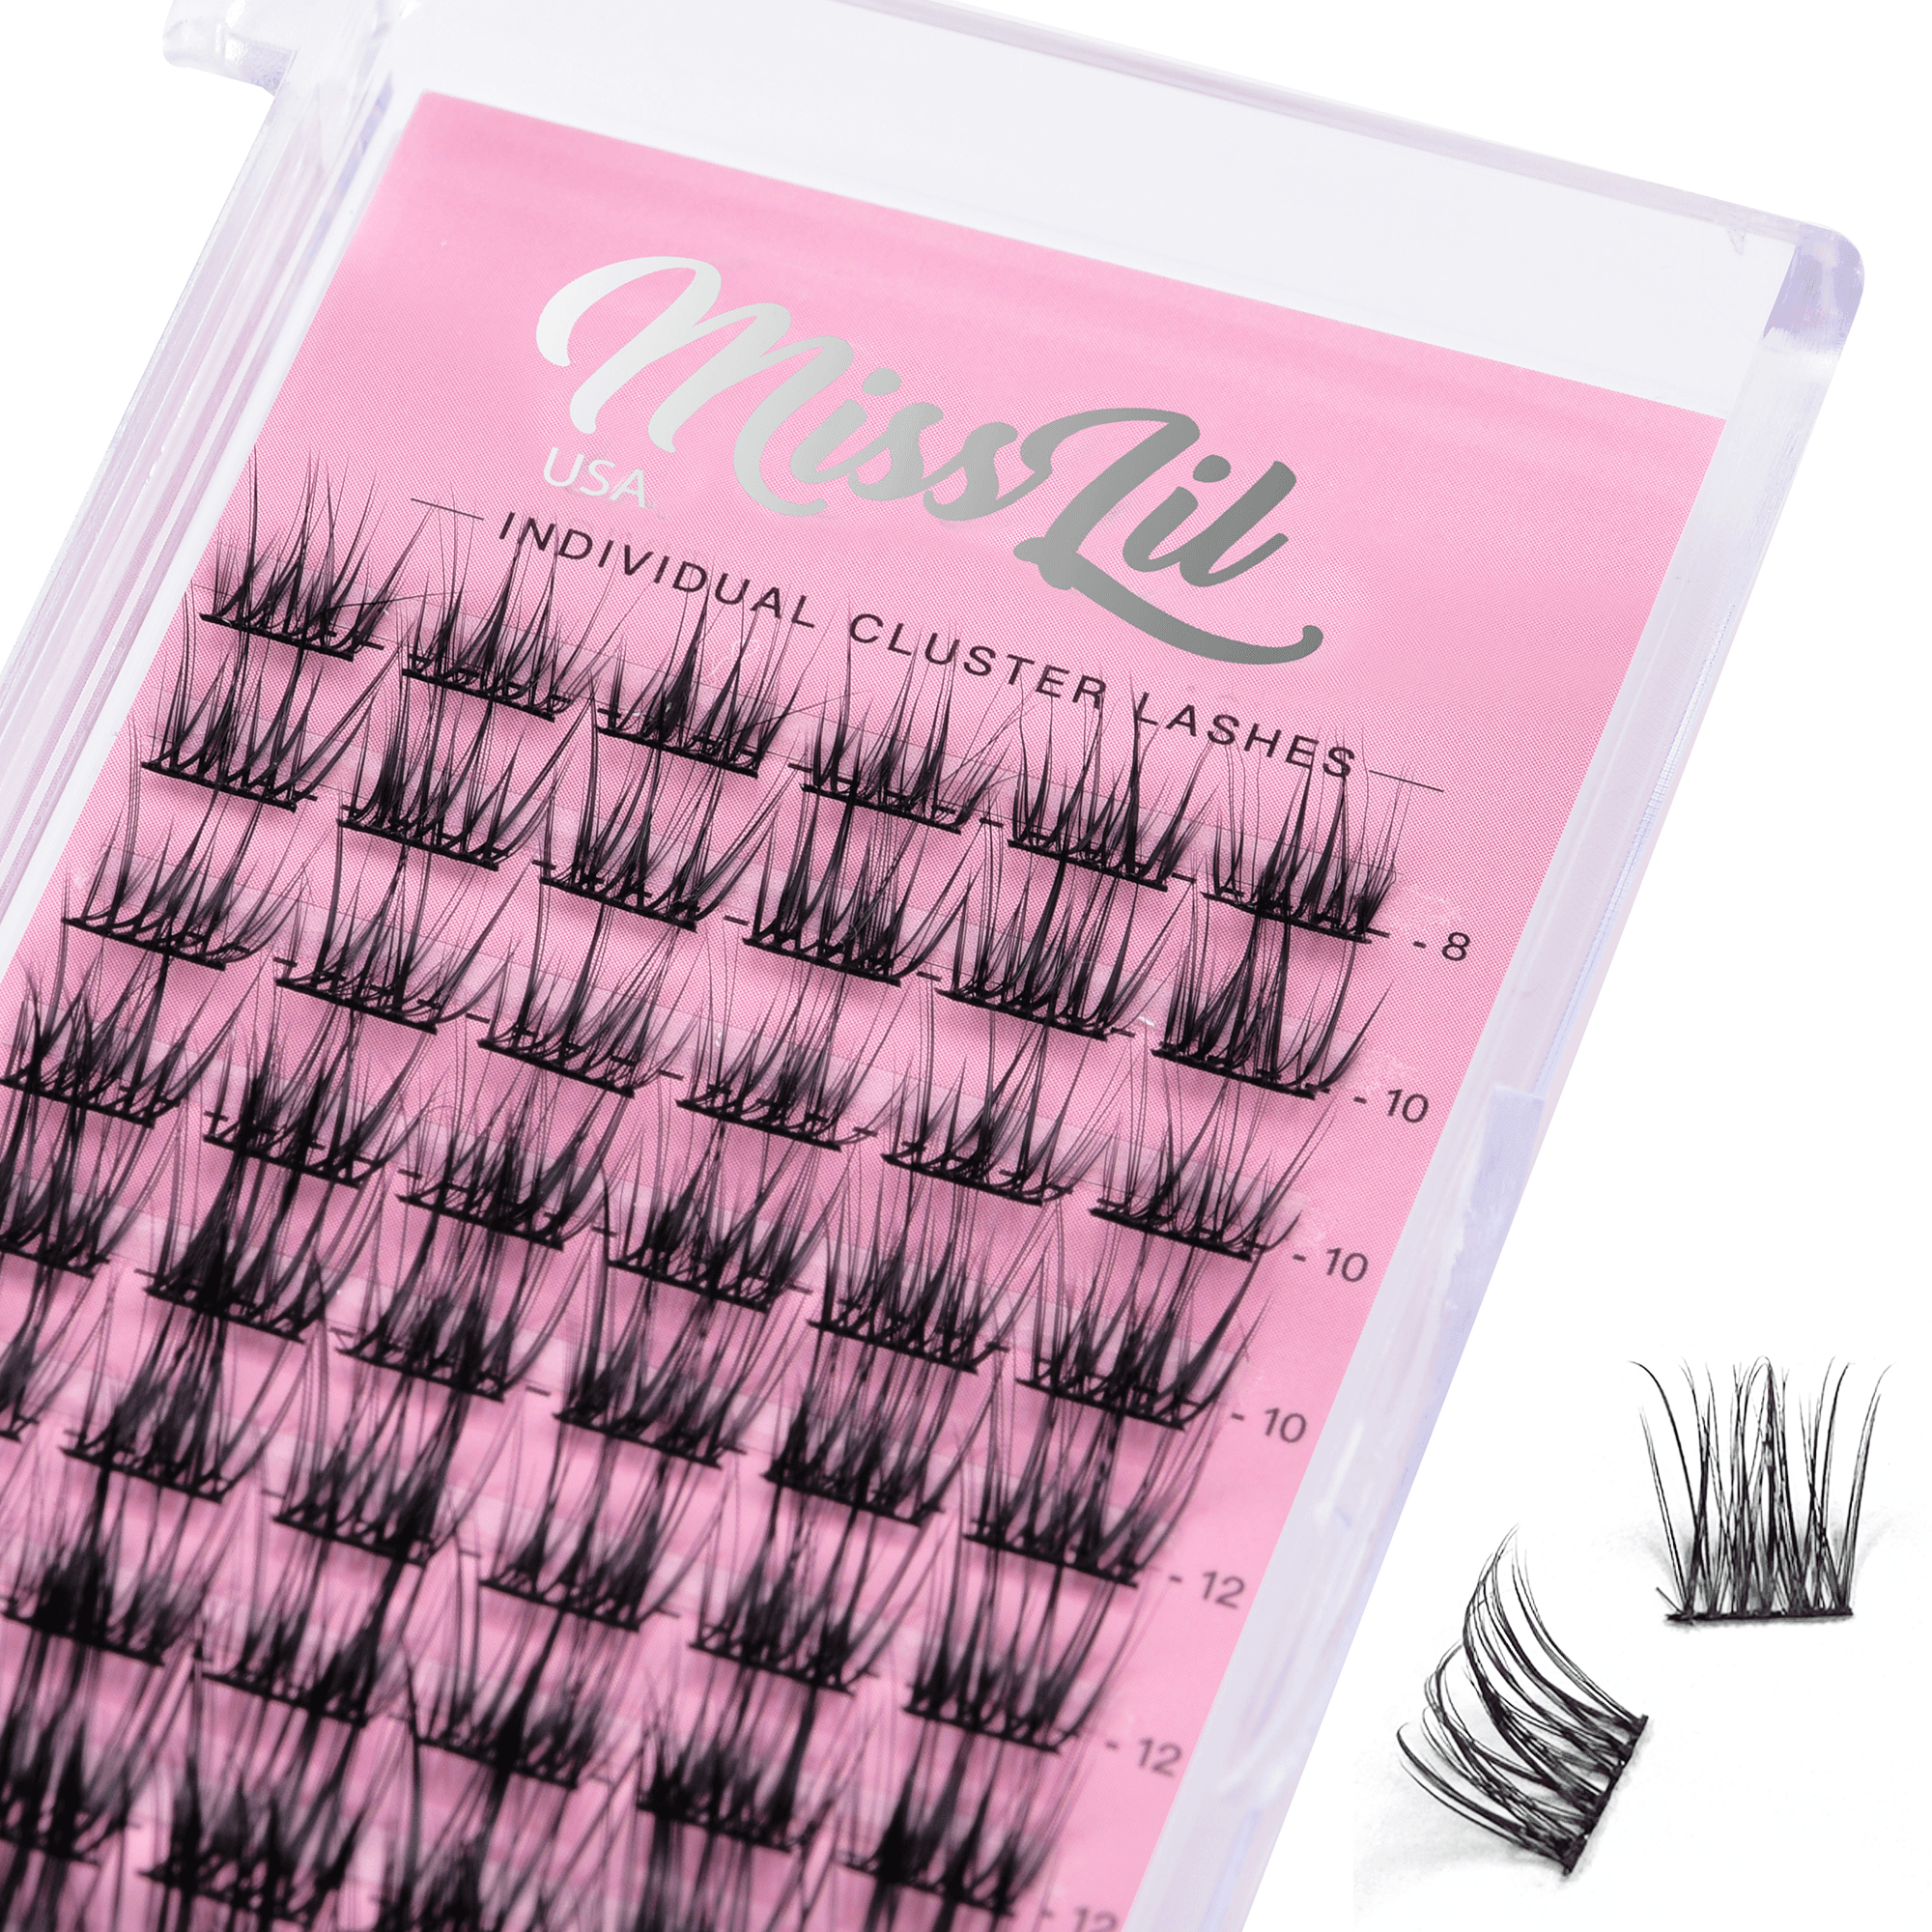 DIY individual Cluster Lashes AD-27 Small MIX Tray - Miss Lil USA Wholesale